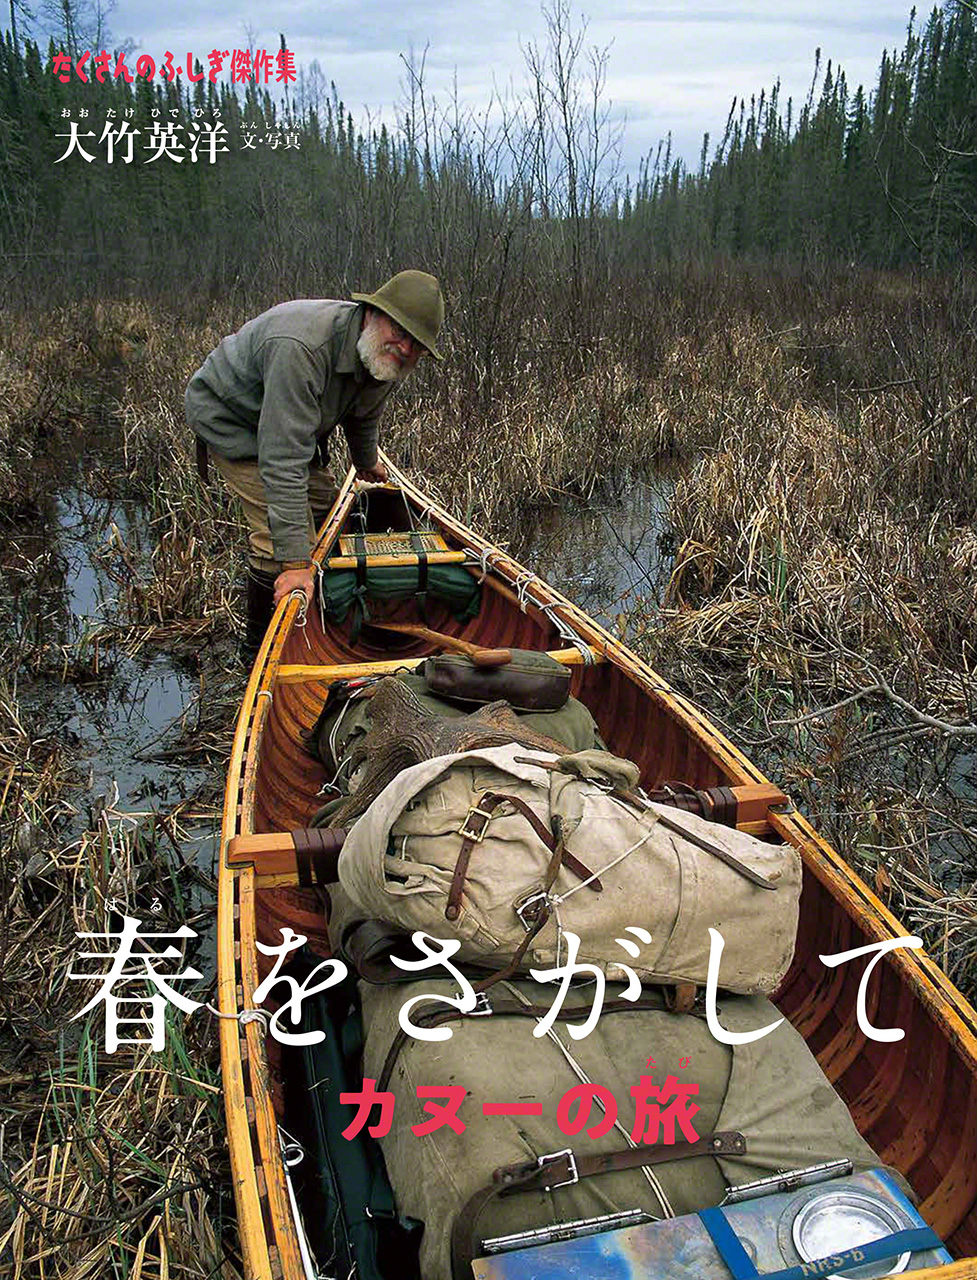 Haru o sagashite: kanū no tabi (In Search of Spring by Canoe), a special edition put out in 2020 by the Takusan no fushigi (World of Wonders) series.